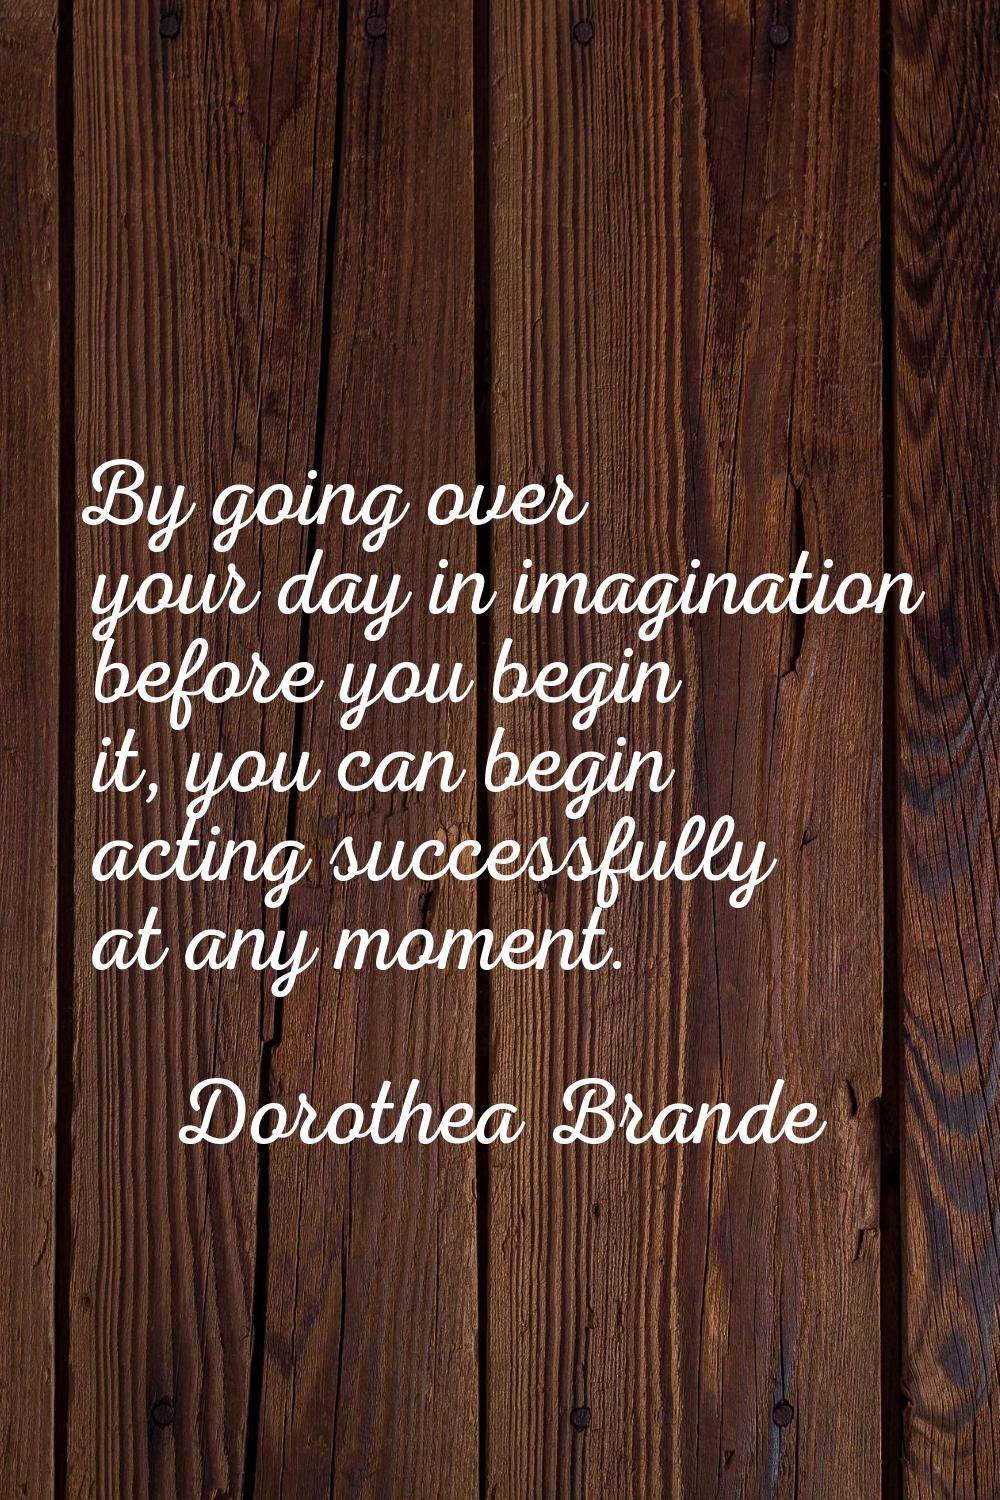 By going over your day in imagination before you begin it, you can begin acting successfully at any